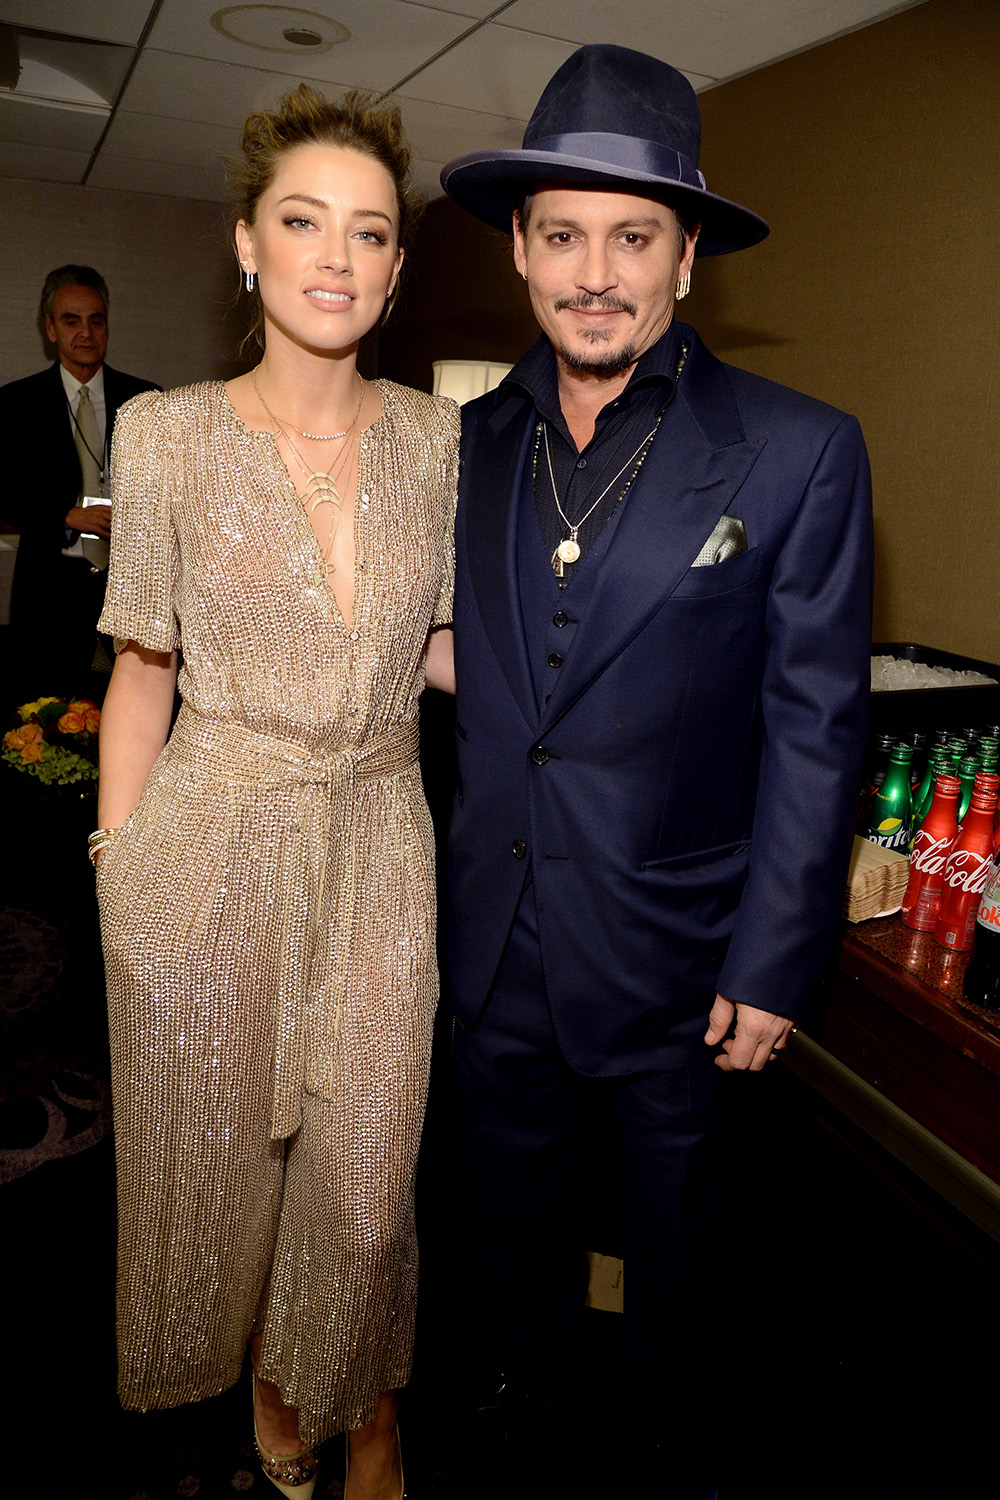 Amber and Johnny at the 19th Annual Hollywood Film Awards at The Beverly Hilton Hotel in November, 2015.